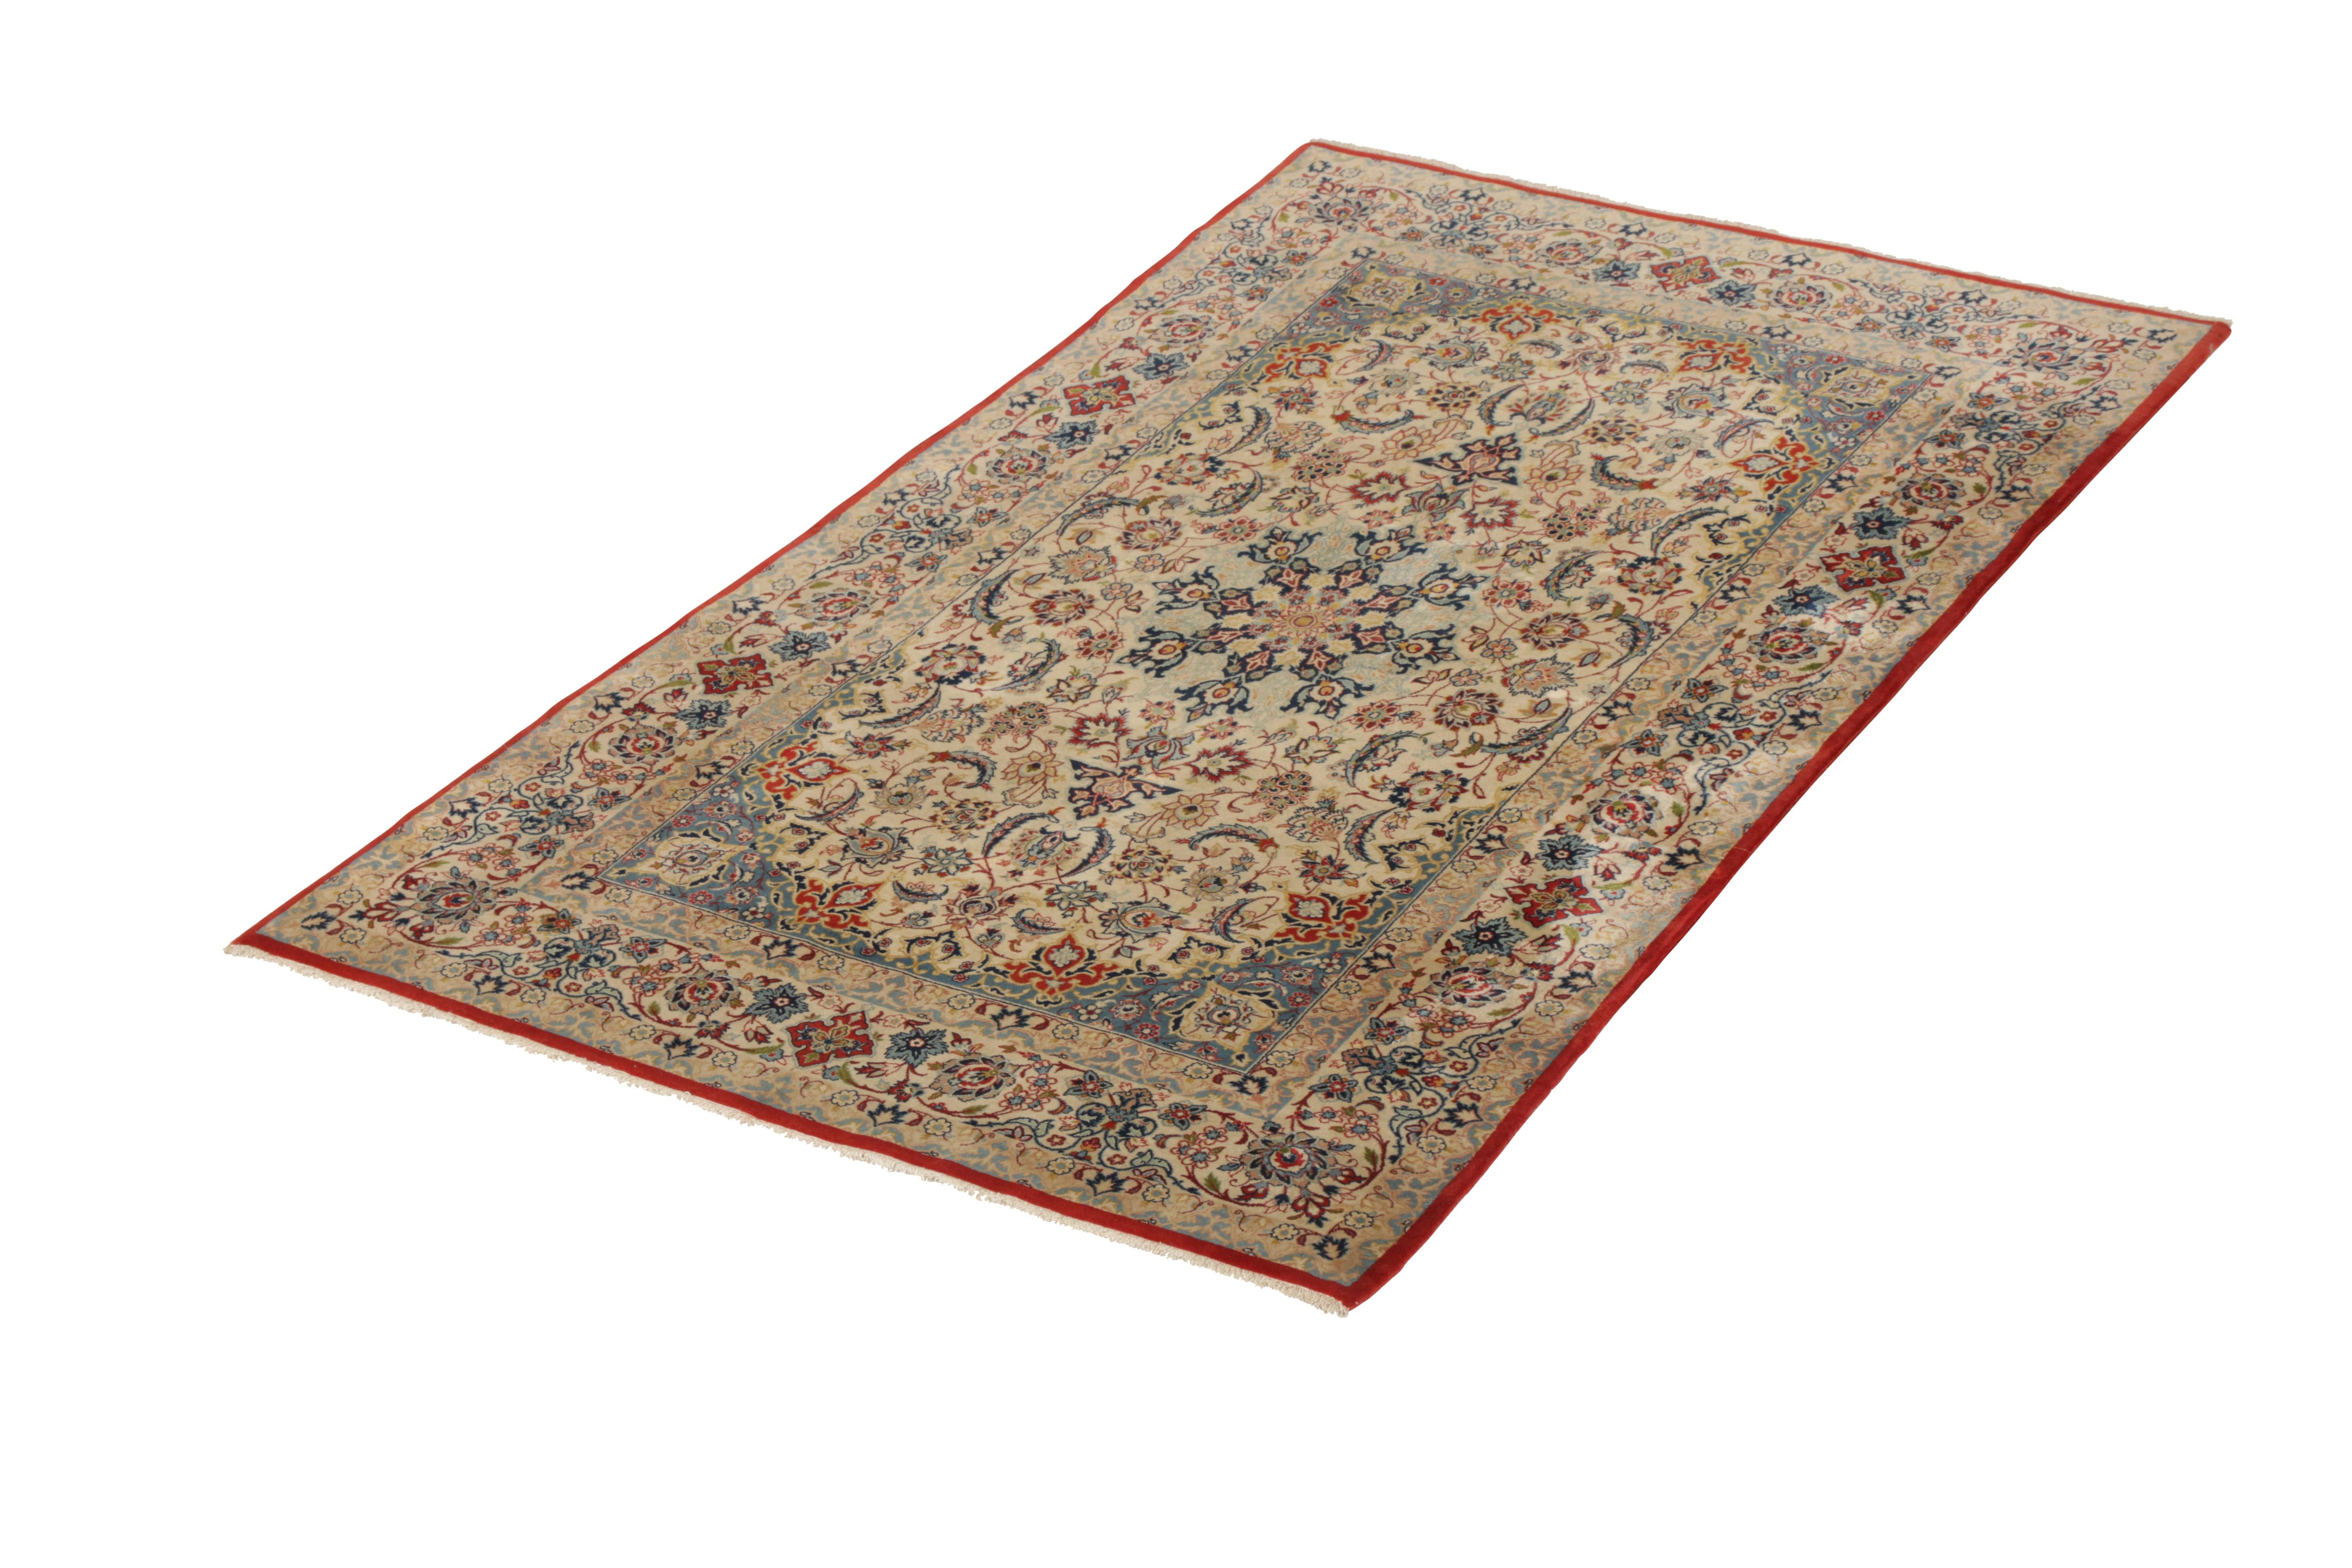 Hand knotted in a luxurious wool and sheen silk originating circa 1950-1960, this vintage Persian rug connotes a midcentury Isfahan rug style, celebrated among the traditional Persian rug styles for intricacy and grandeur like that of this married